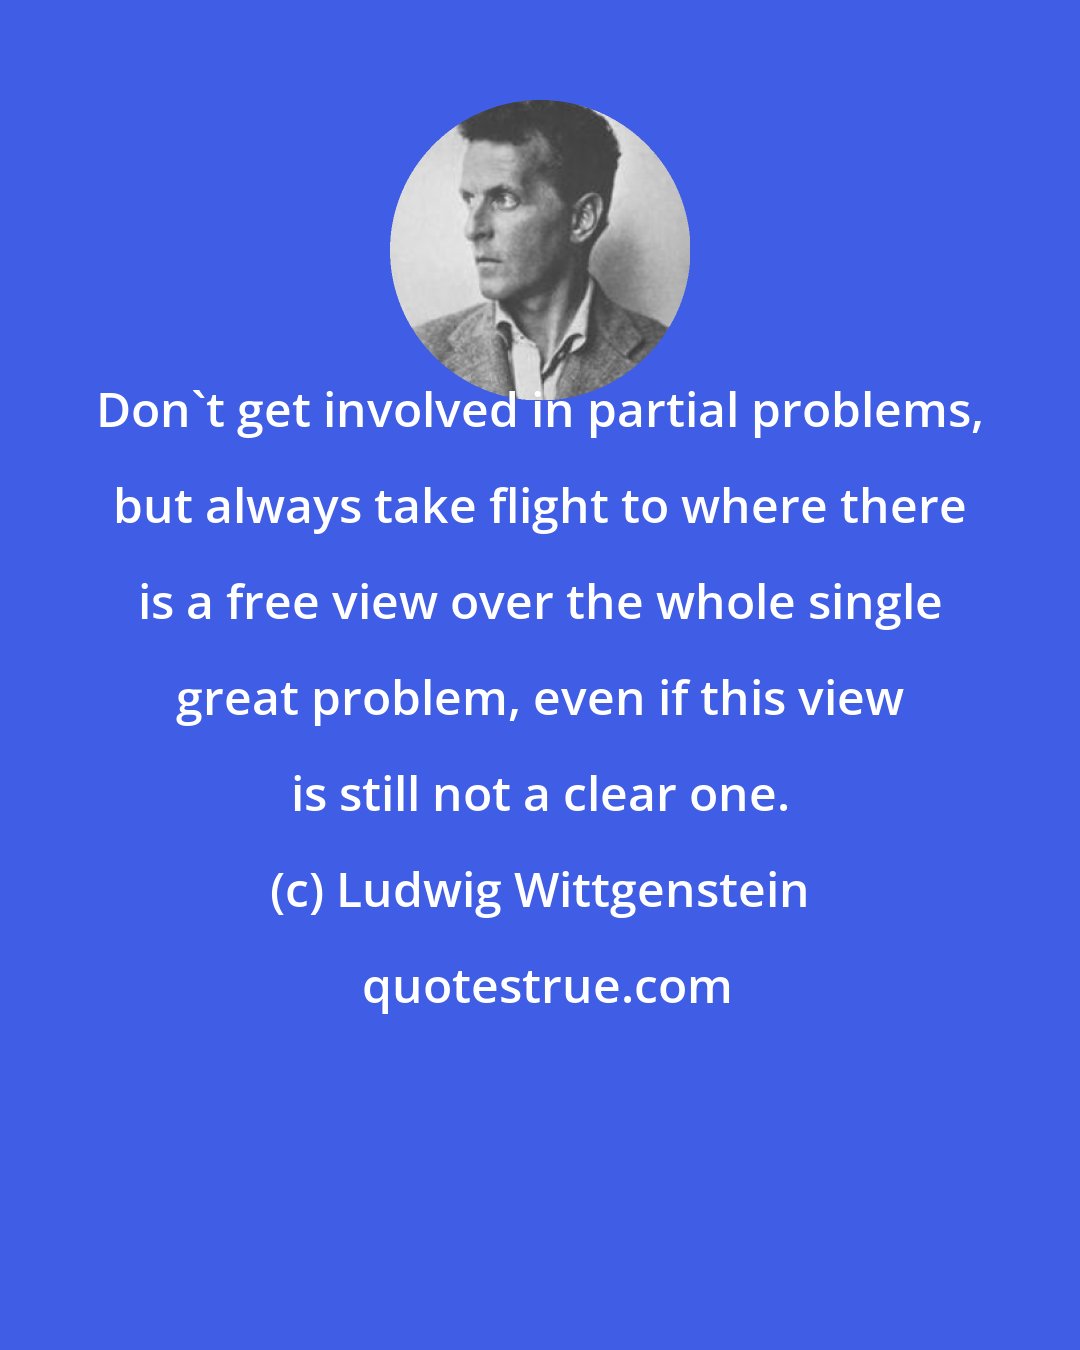 Ludwig Wittgenstein: Don't get involved in partial problems, but always take flight to where there is a free view over the whole single great problem, even if this view is still not a clear one.